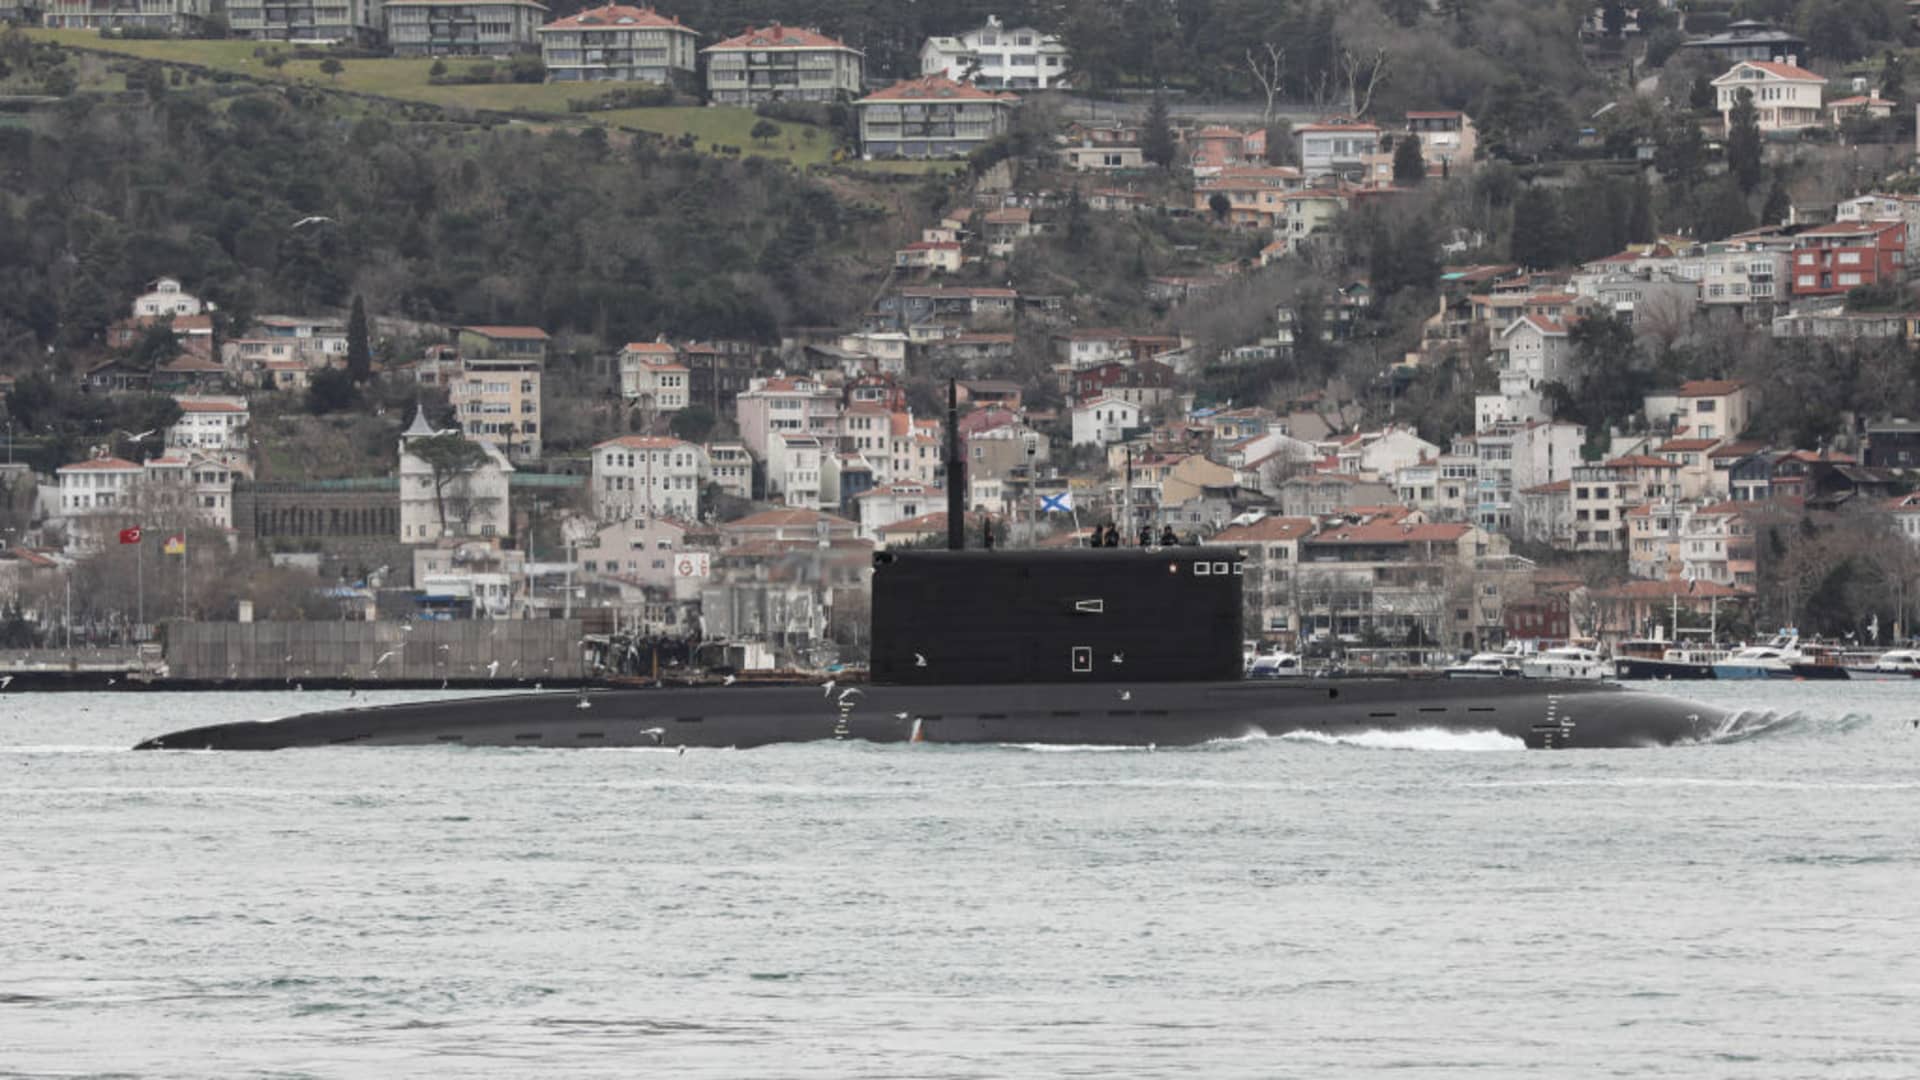 The Russian Navy’s Kilo-class submarine Rostov-na-Donu B-237 enters the Bosphorus Strait en route to the Black Sea on Feb. 13, 2022 in Istanbul, Turkey.